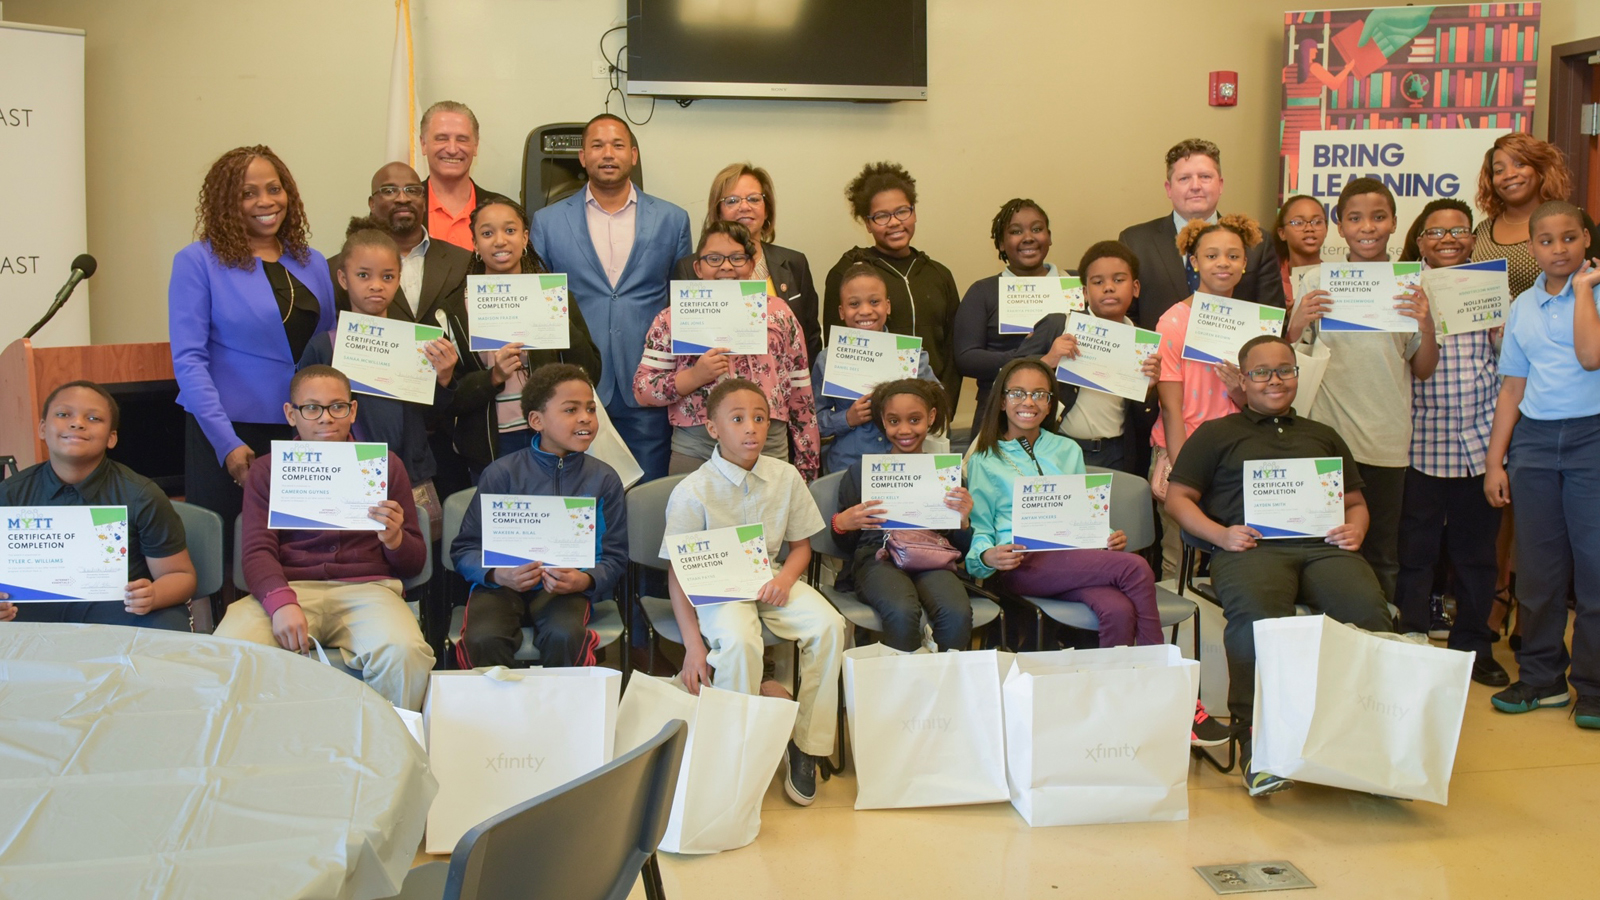 Comcast Foundation Made Mentoring Youth Through Technology Grant to